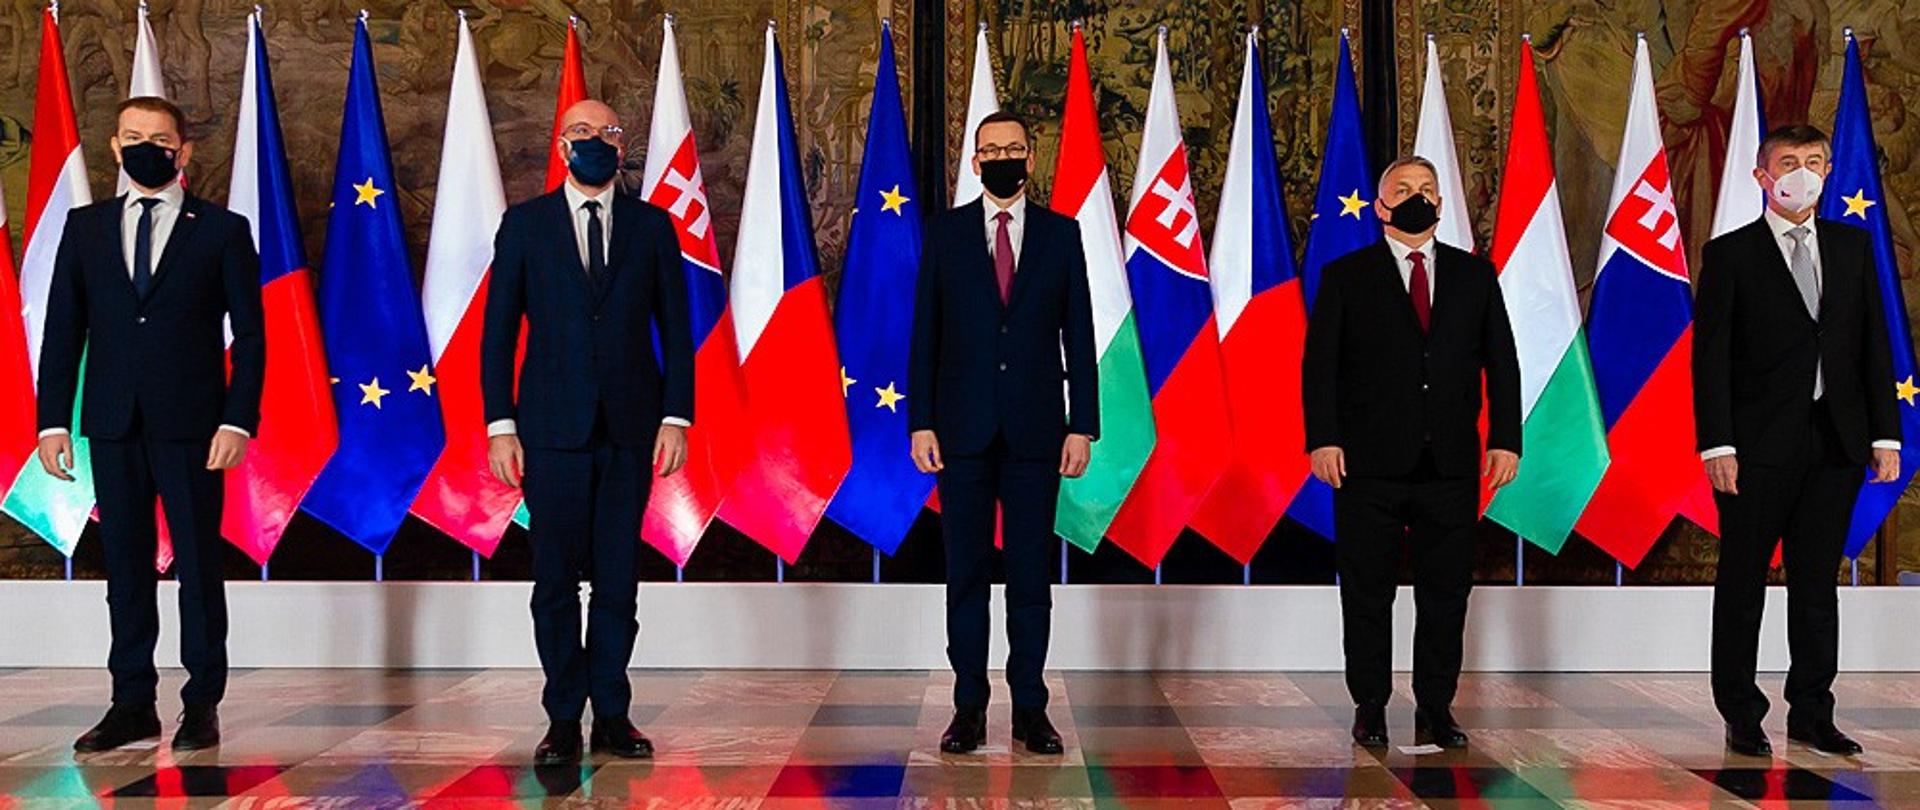 Visegrad Group delivers specifics at Anniversary Summit 